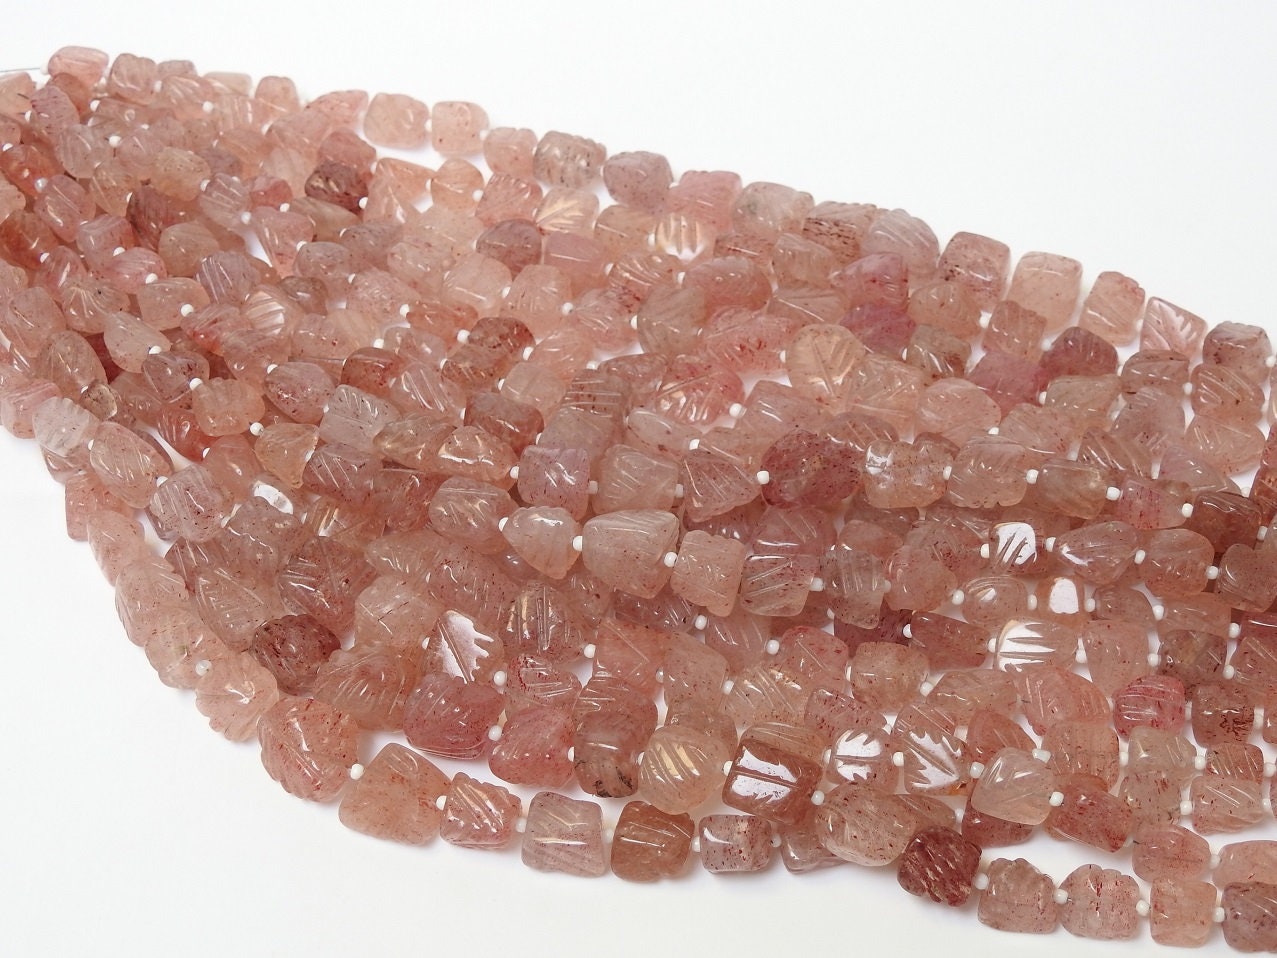 Strawberry Quartz Carving Bead,Tumble,Nuggets,Loose Stone,Handmade,For Making Jewelry,Wholesaler,12Inch 12X10To8X8MM Approx,PME-TU5 | Save 33% - Rajasthan Living 15